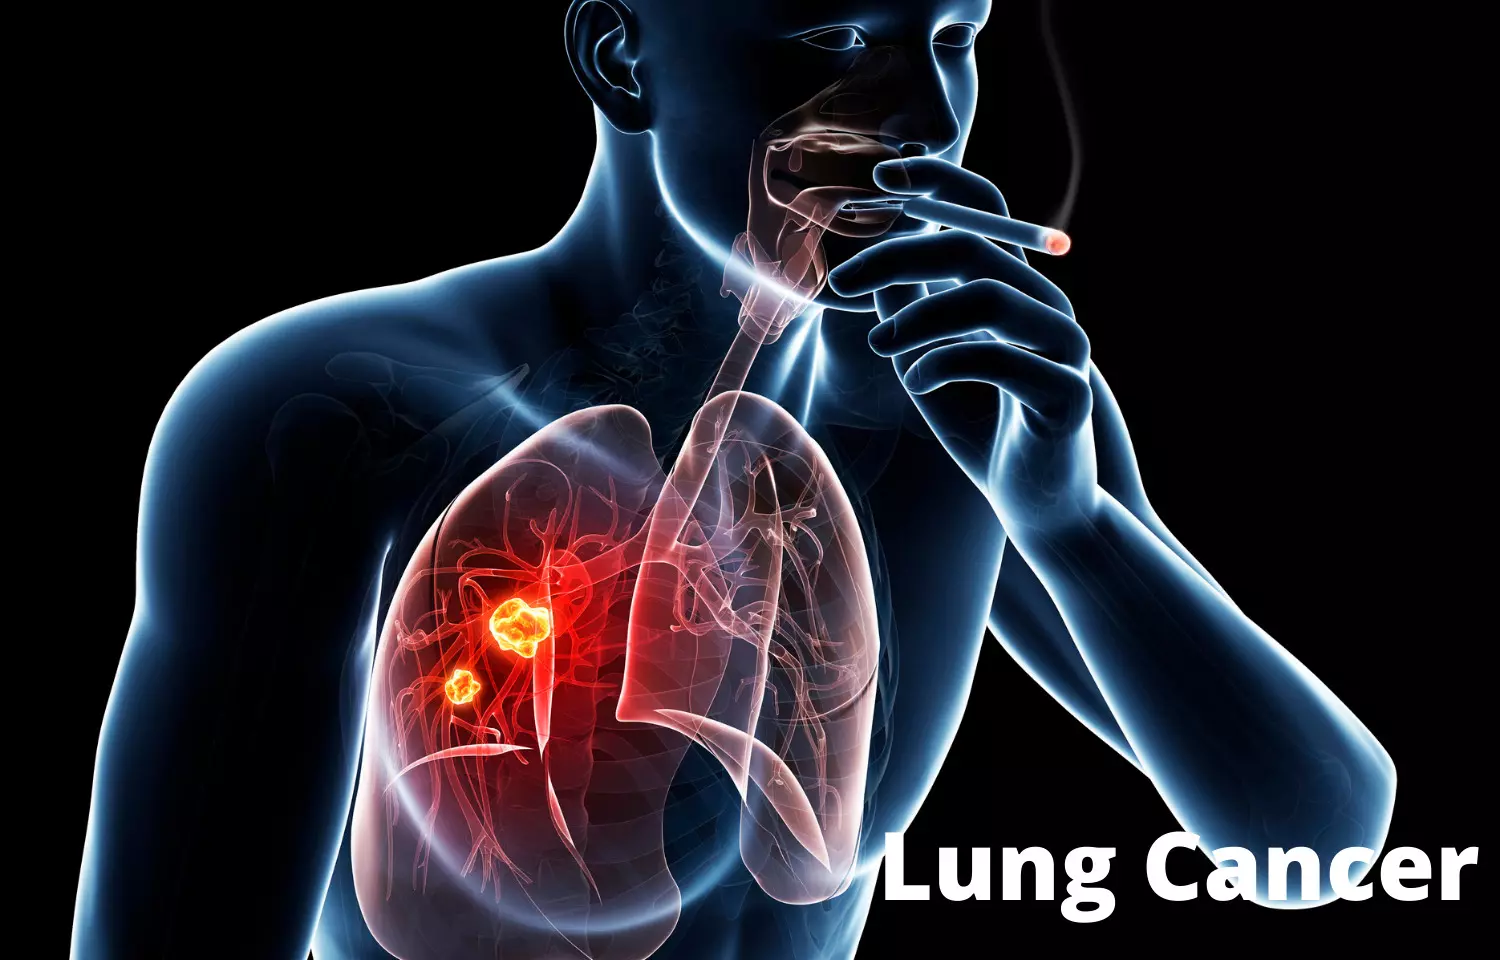 CT-detected emphysema associated with higher lung cancer risk